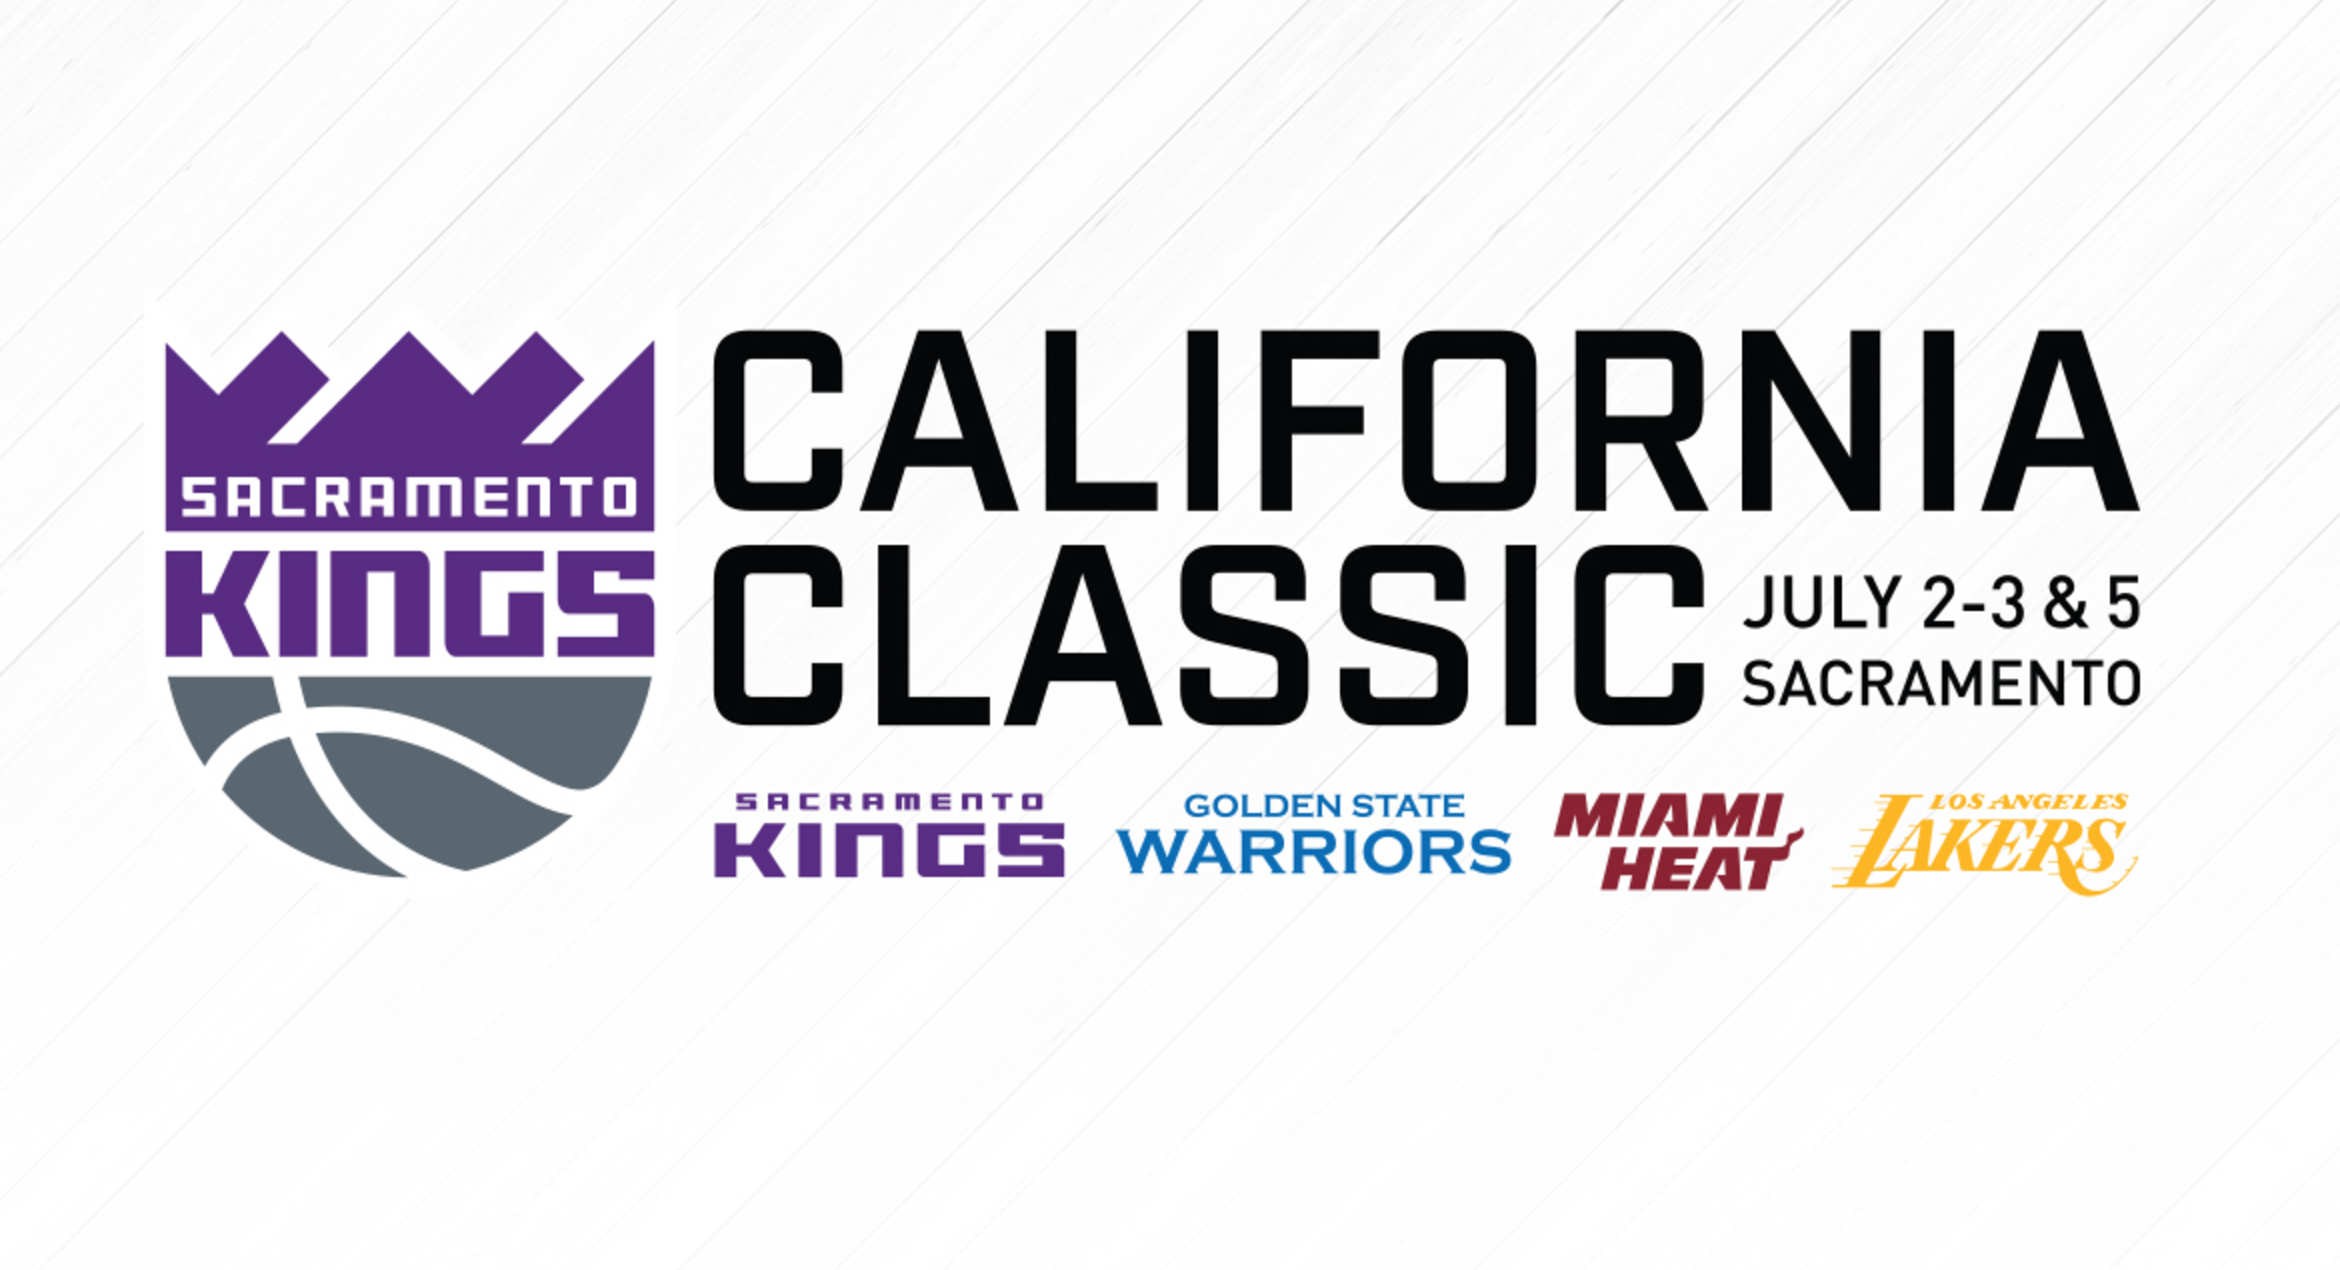 Kings to Host California Classic Summer League at Golden 1 Center